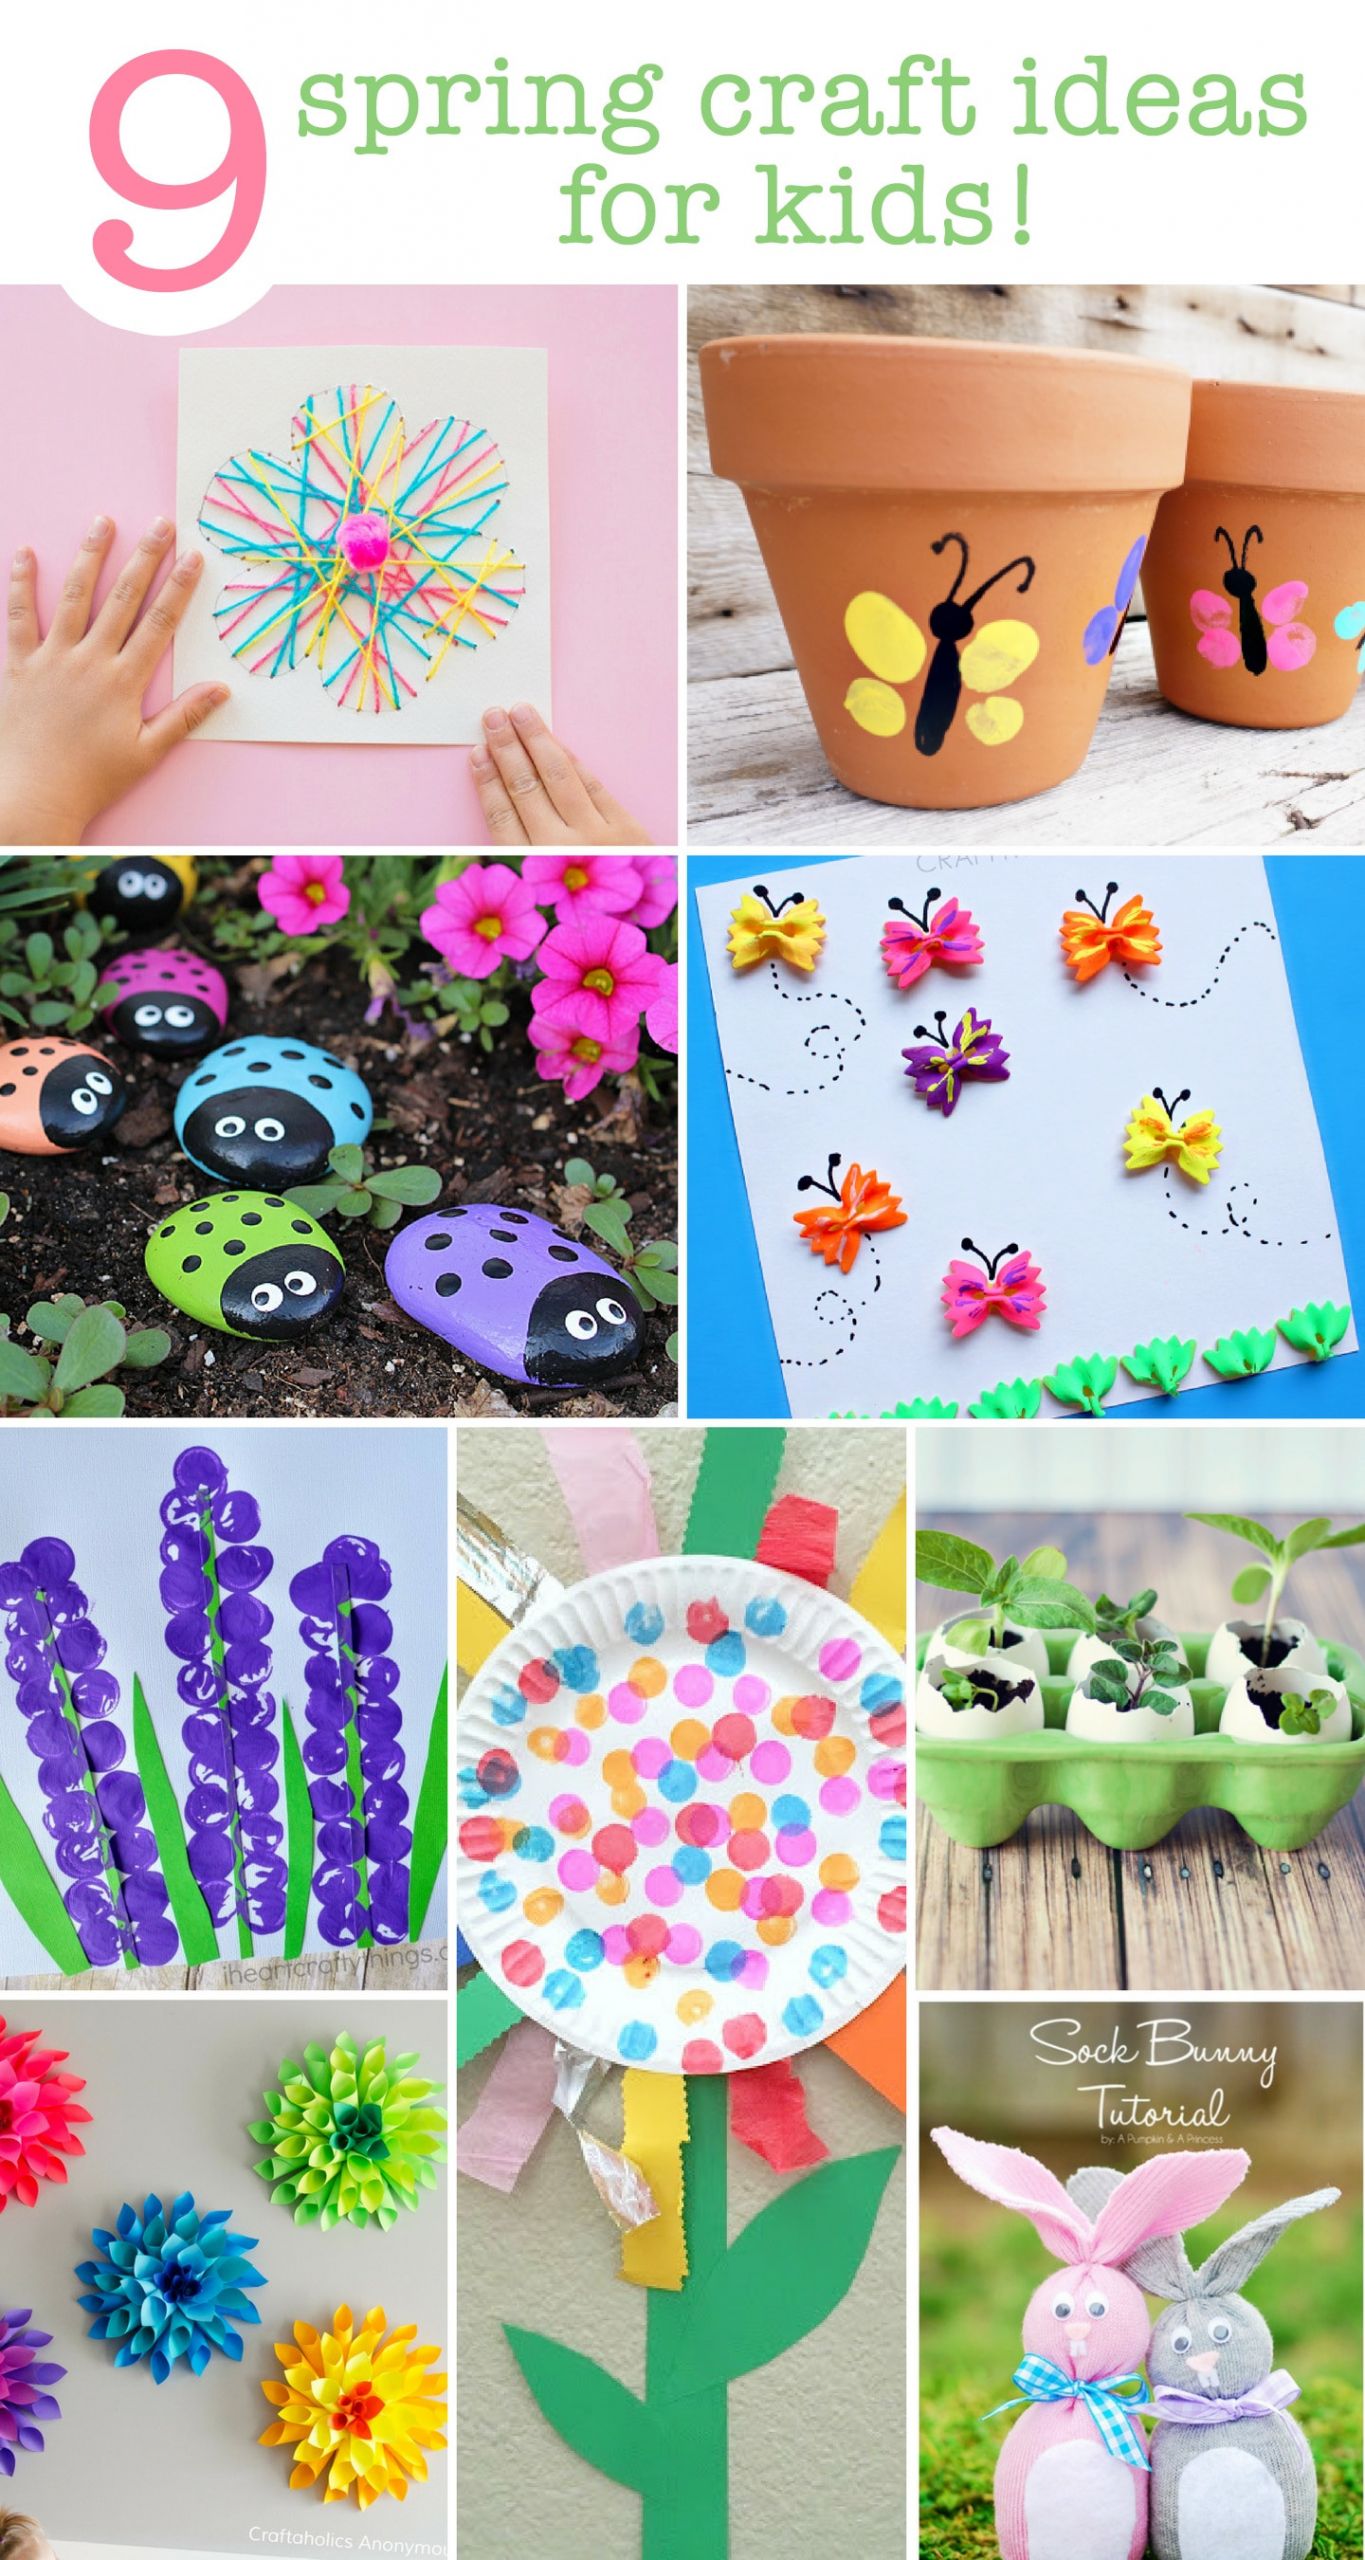 Springtime Crafts For Toddlers
 9 Spring Craft Ideas For The Kids